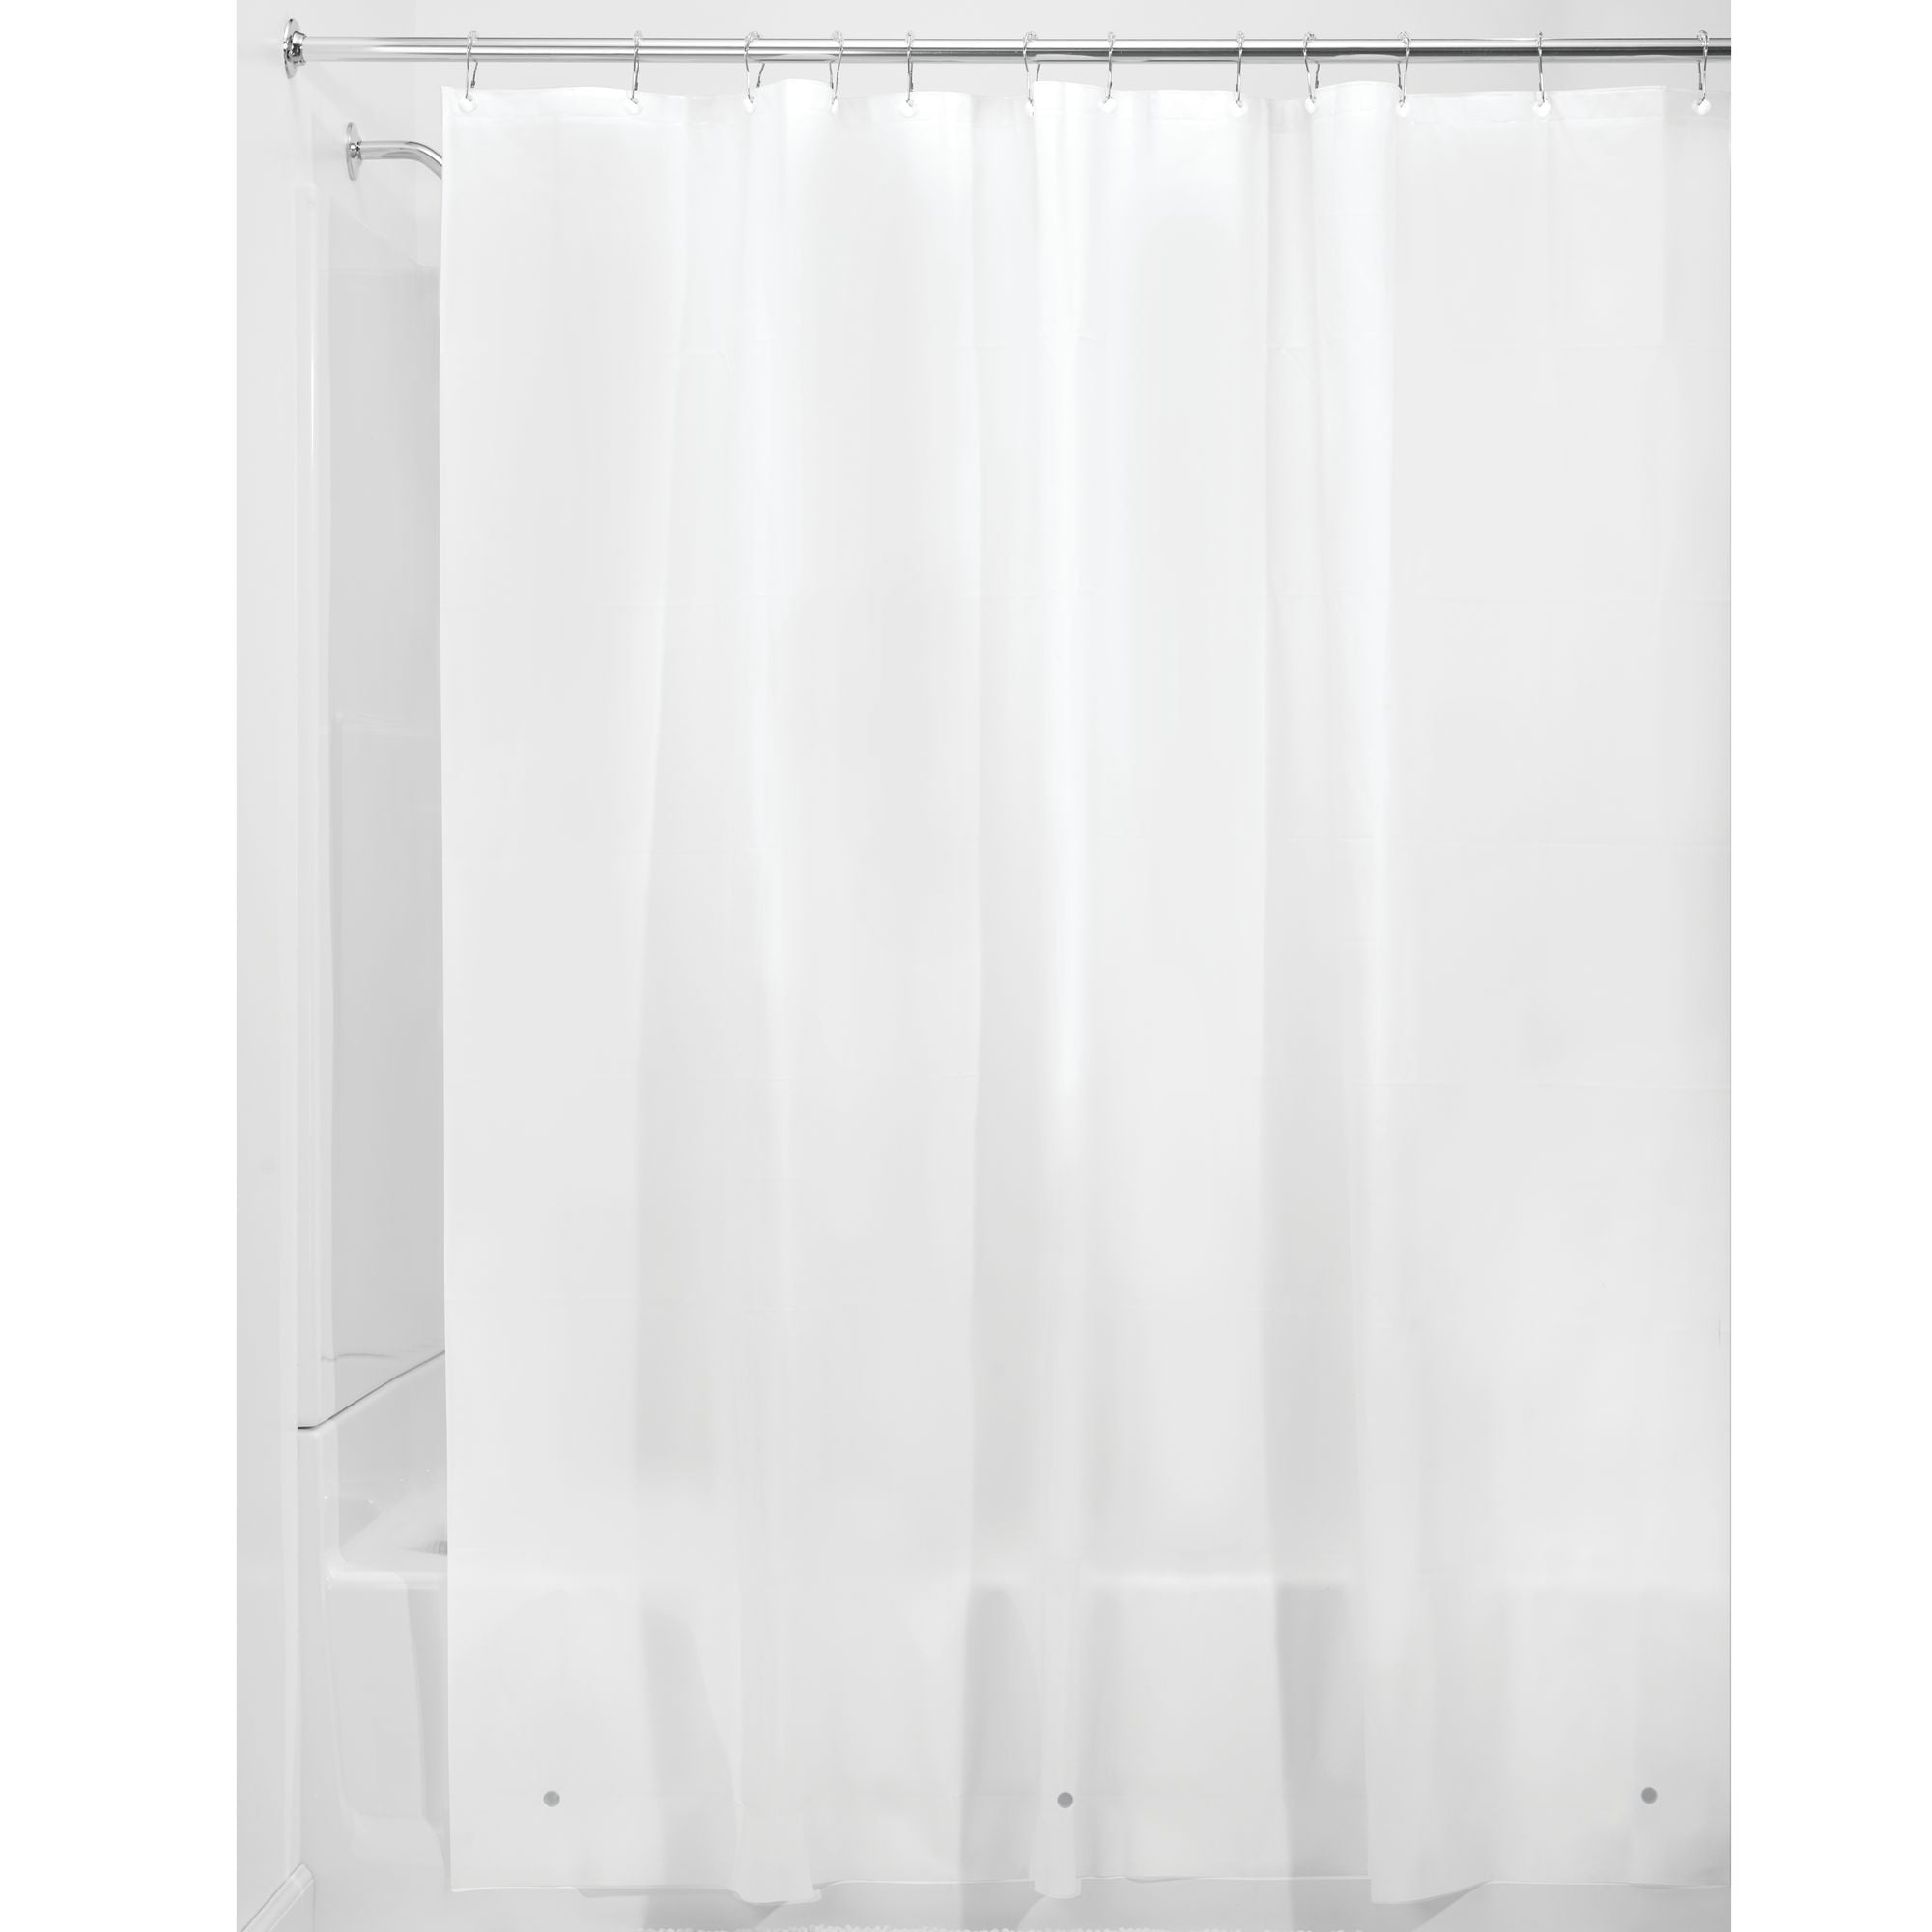 180 cm X 200 cm Curtain for Shower iDesign 3.0 Liner Shower Curtain Made of Mould-Free PEVA White 